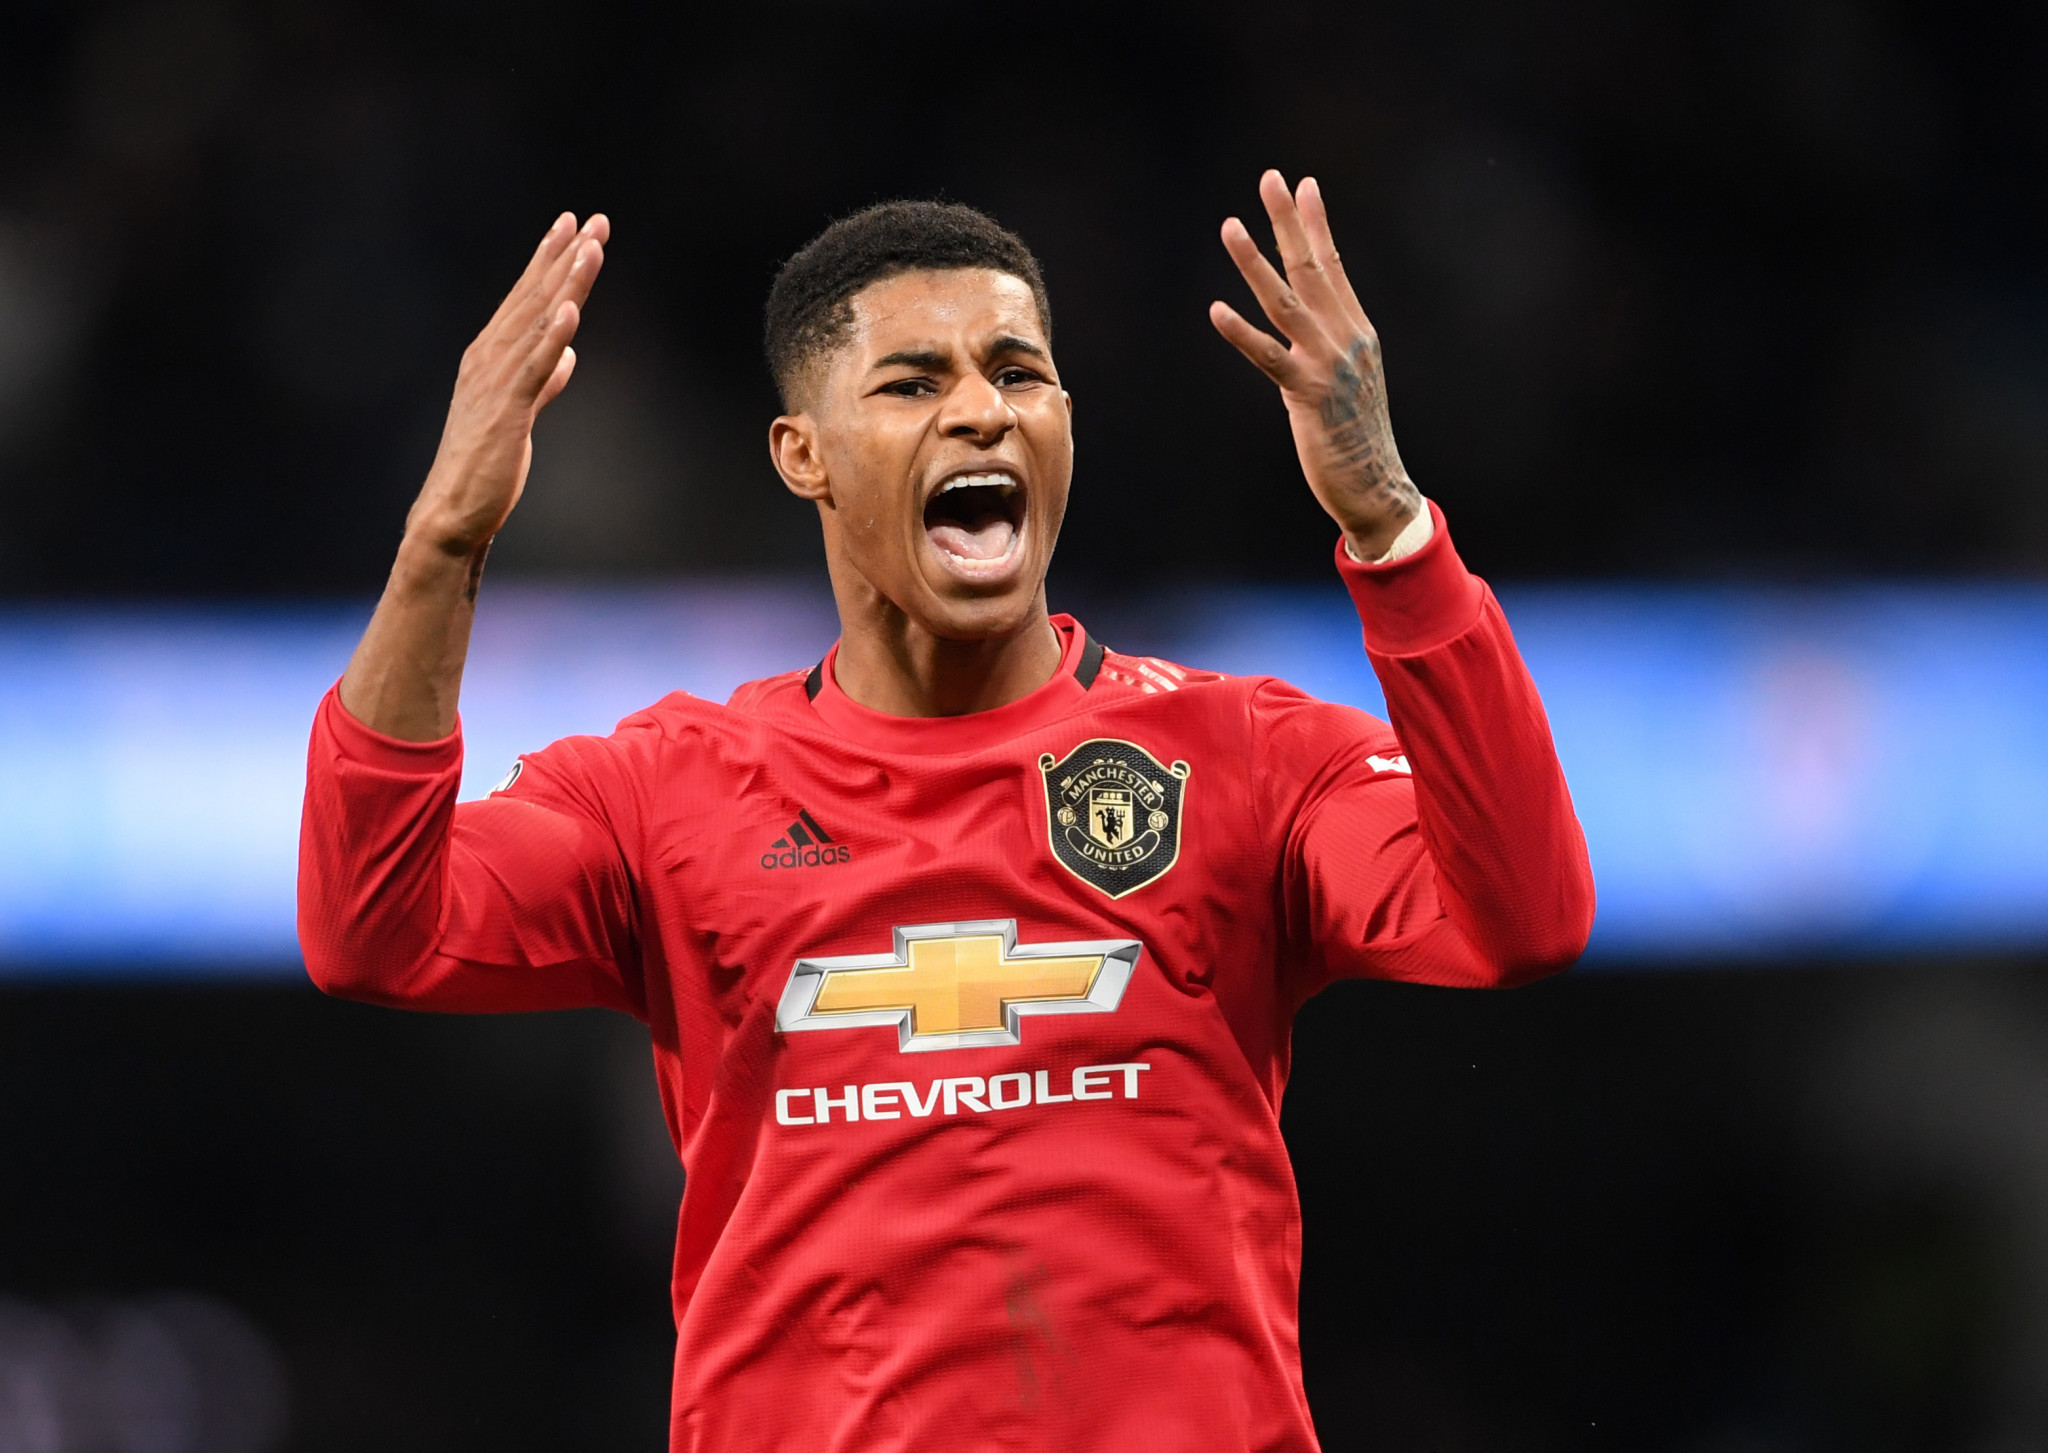 Marcus Rashford has earned plaudits from all allegiances for his campaign to eradicate childhood hunger in Britain ©Getty Images